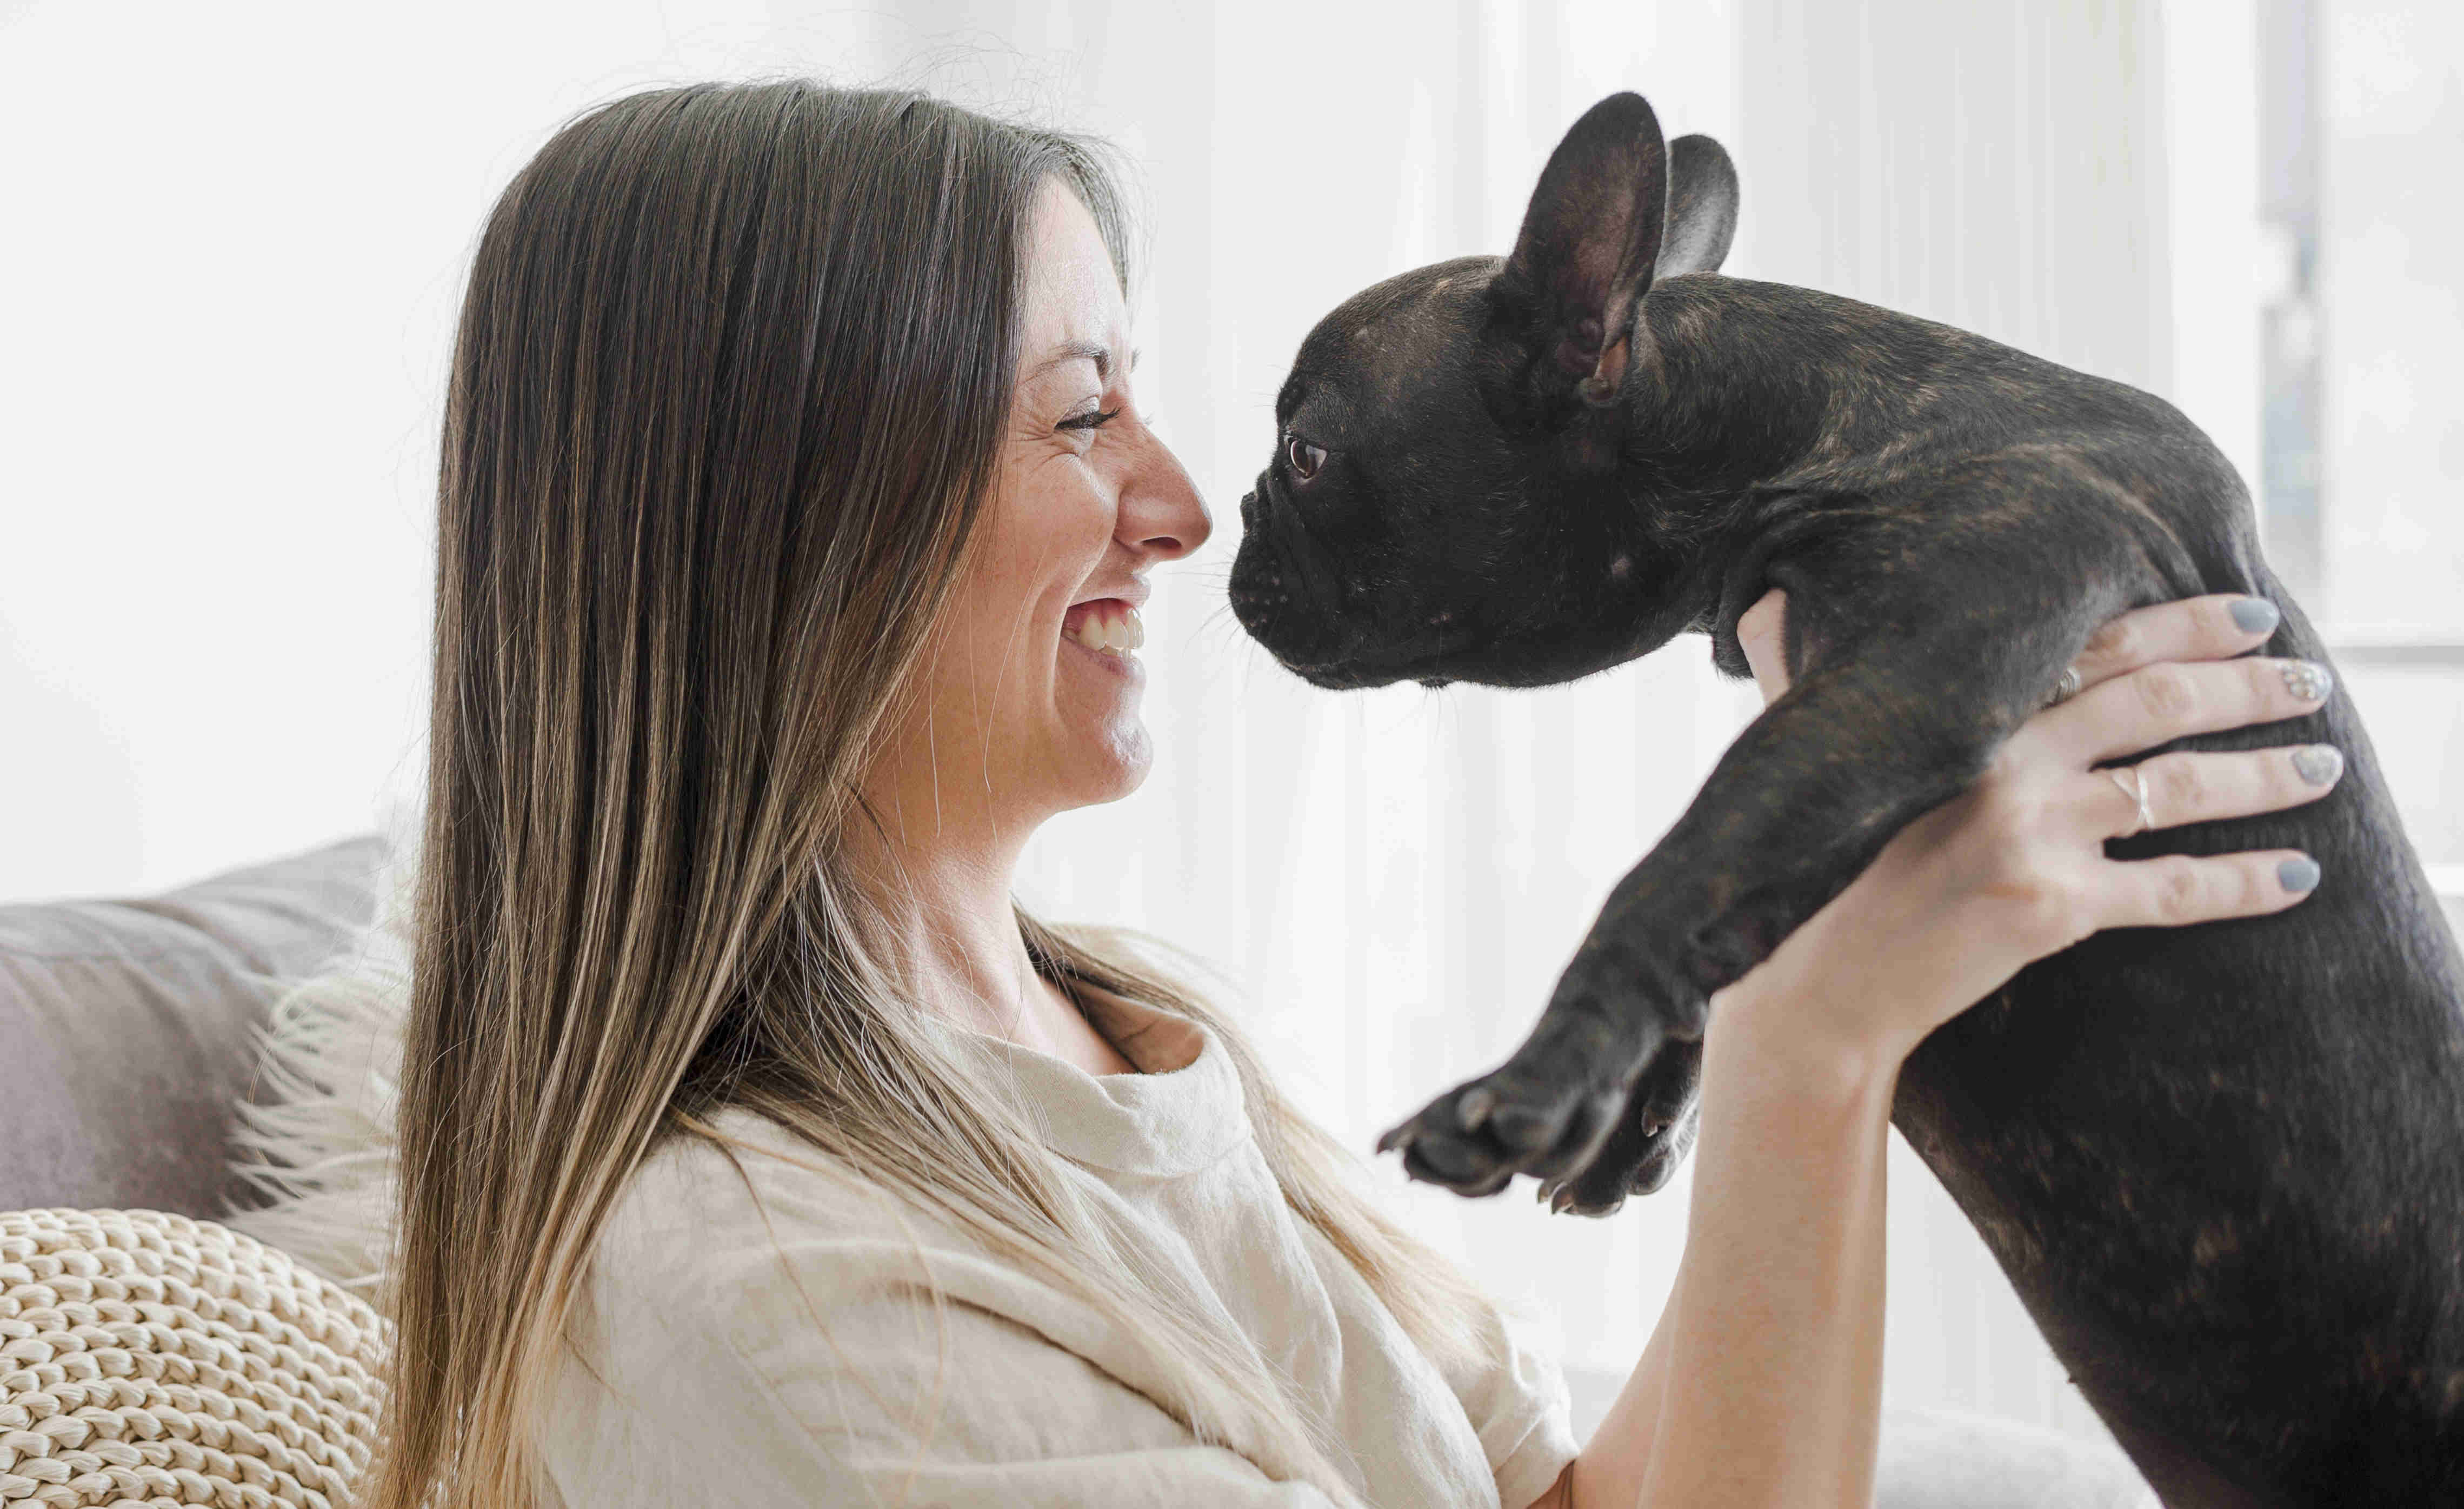 French Bulldog Socialization: How they interact with new people and animals